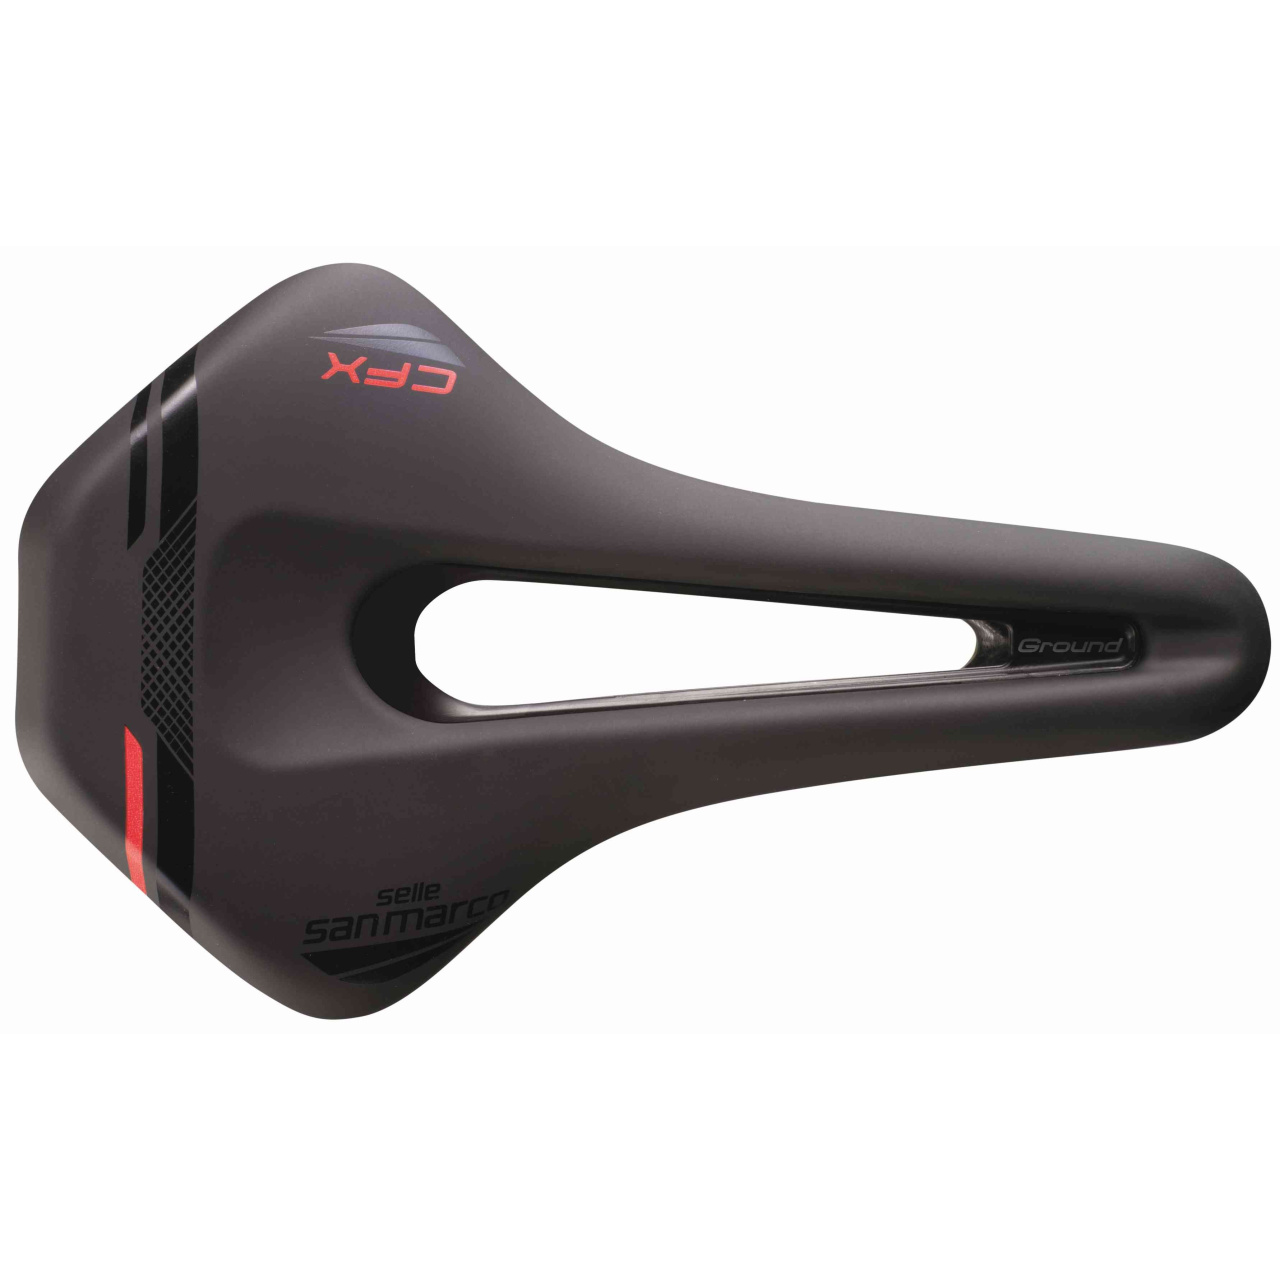 Selle San Marco GrouND Carbon FX Wide